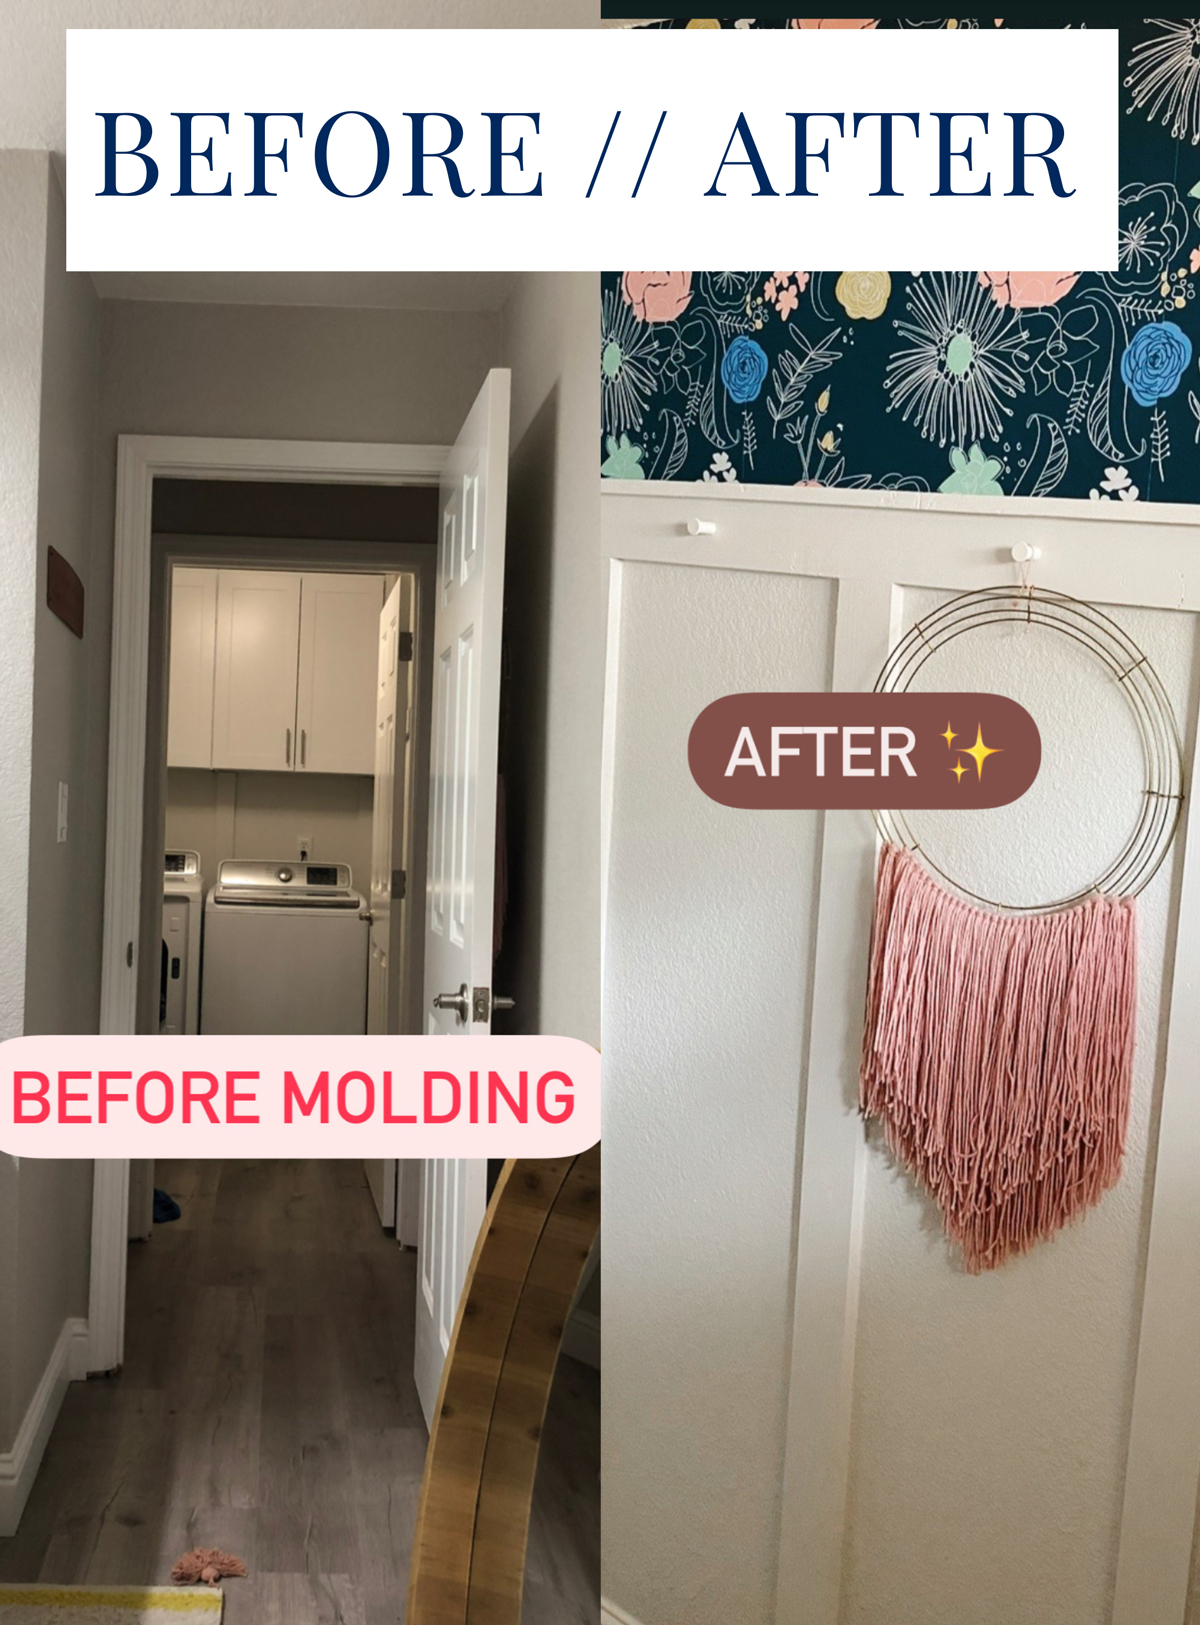 Small bathroom before after photos wall molding